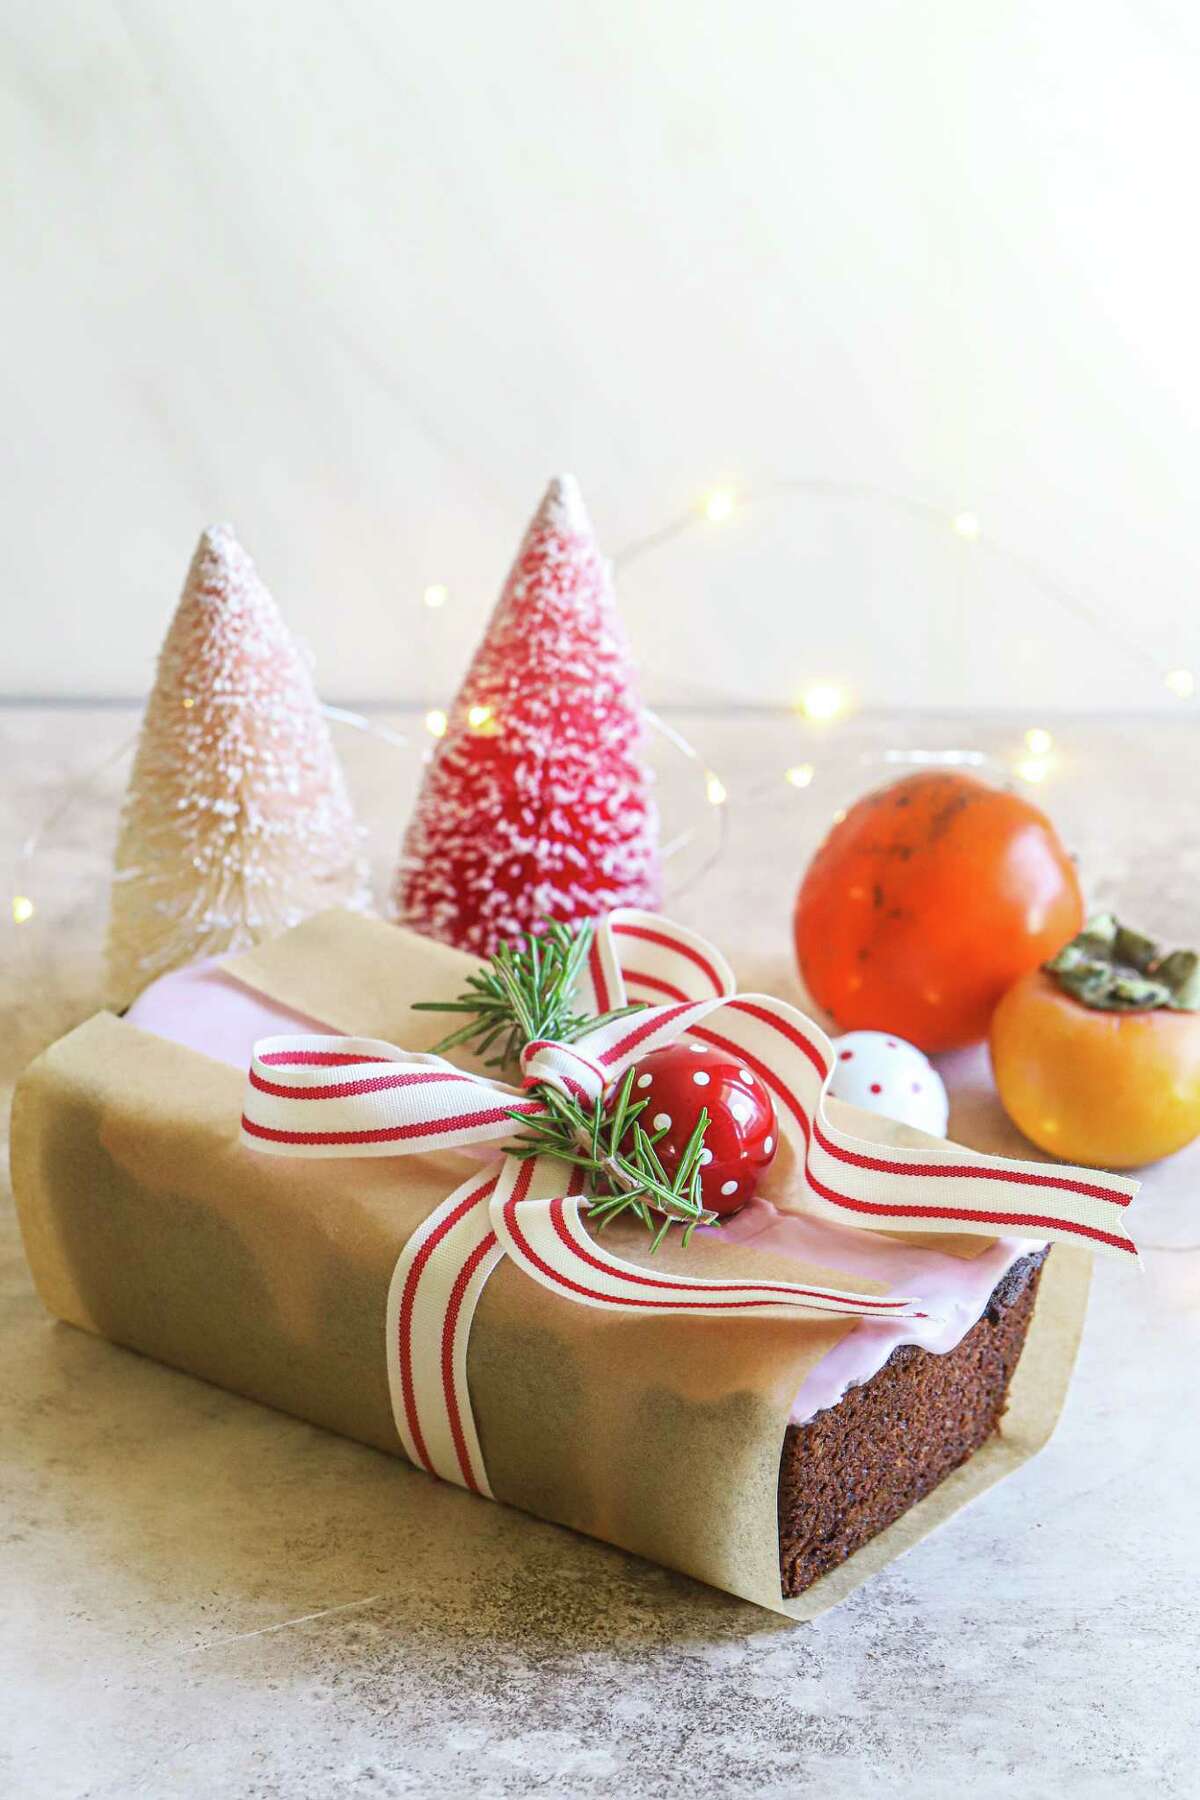 Persimmon & Gingerbread Loaf With Pomegranate Glaze makes a wonderful holiday gift.